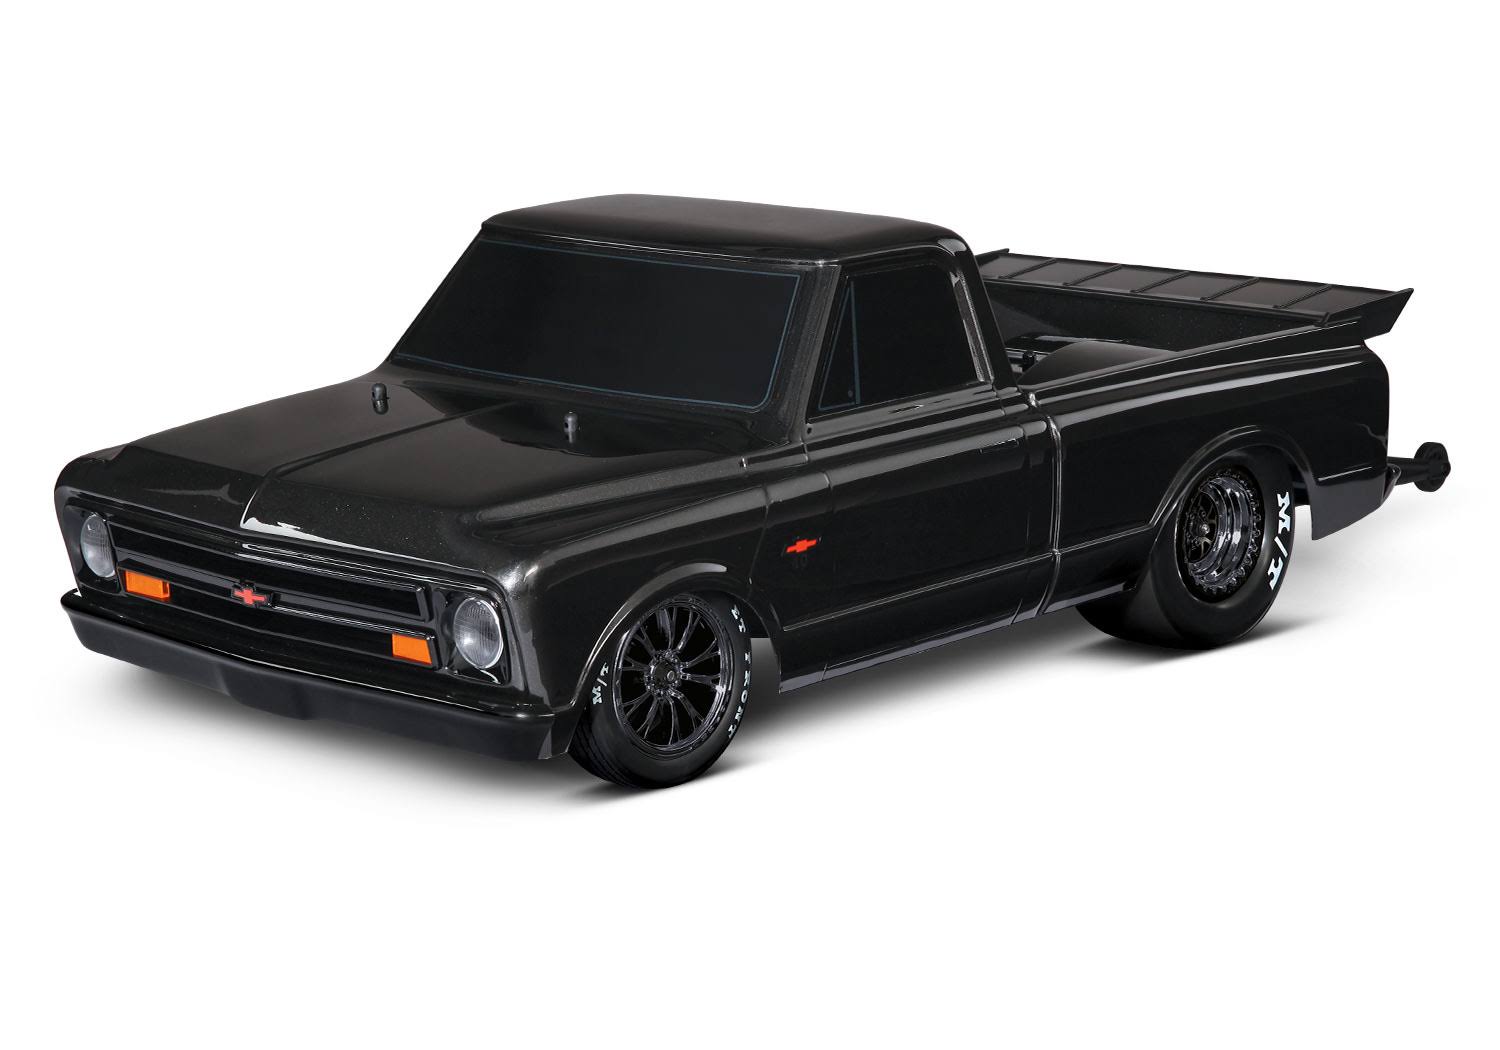 94076-4 Black Drag Slash: Fully Assembled, Ready-To-Race , with 1967 Chevrolet C10 Licensed Body.